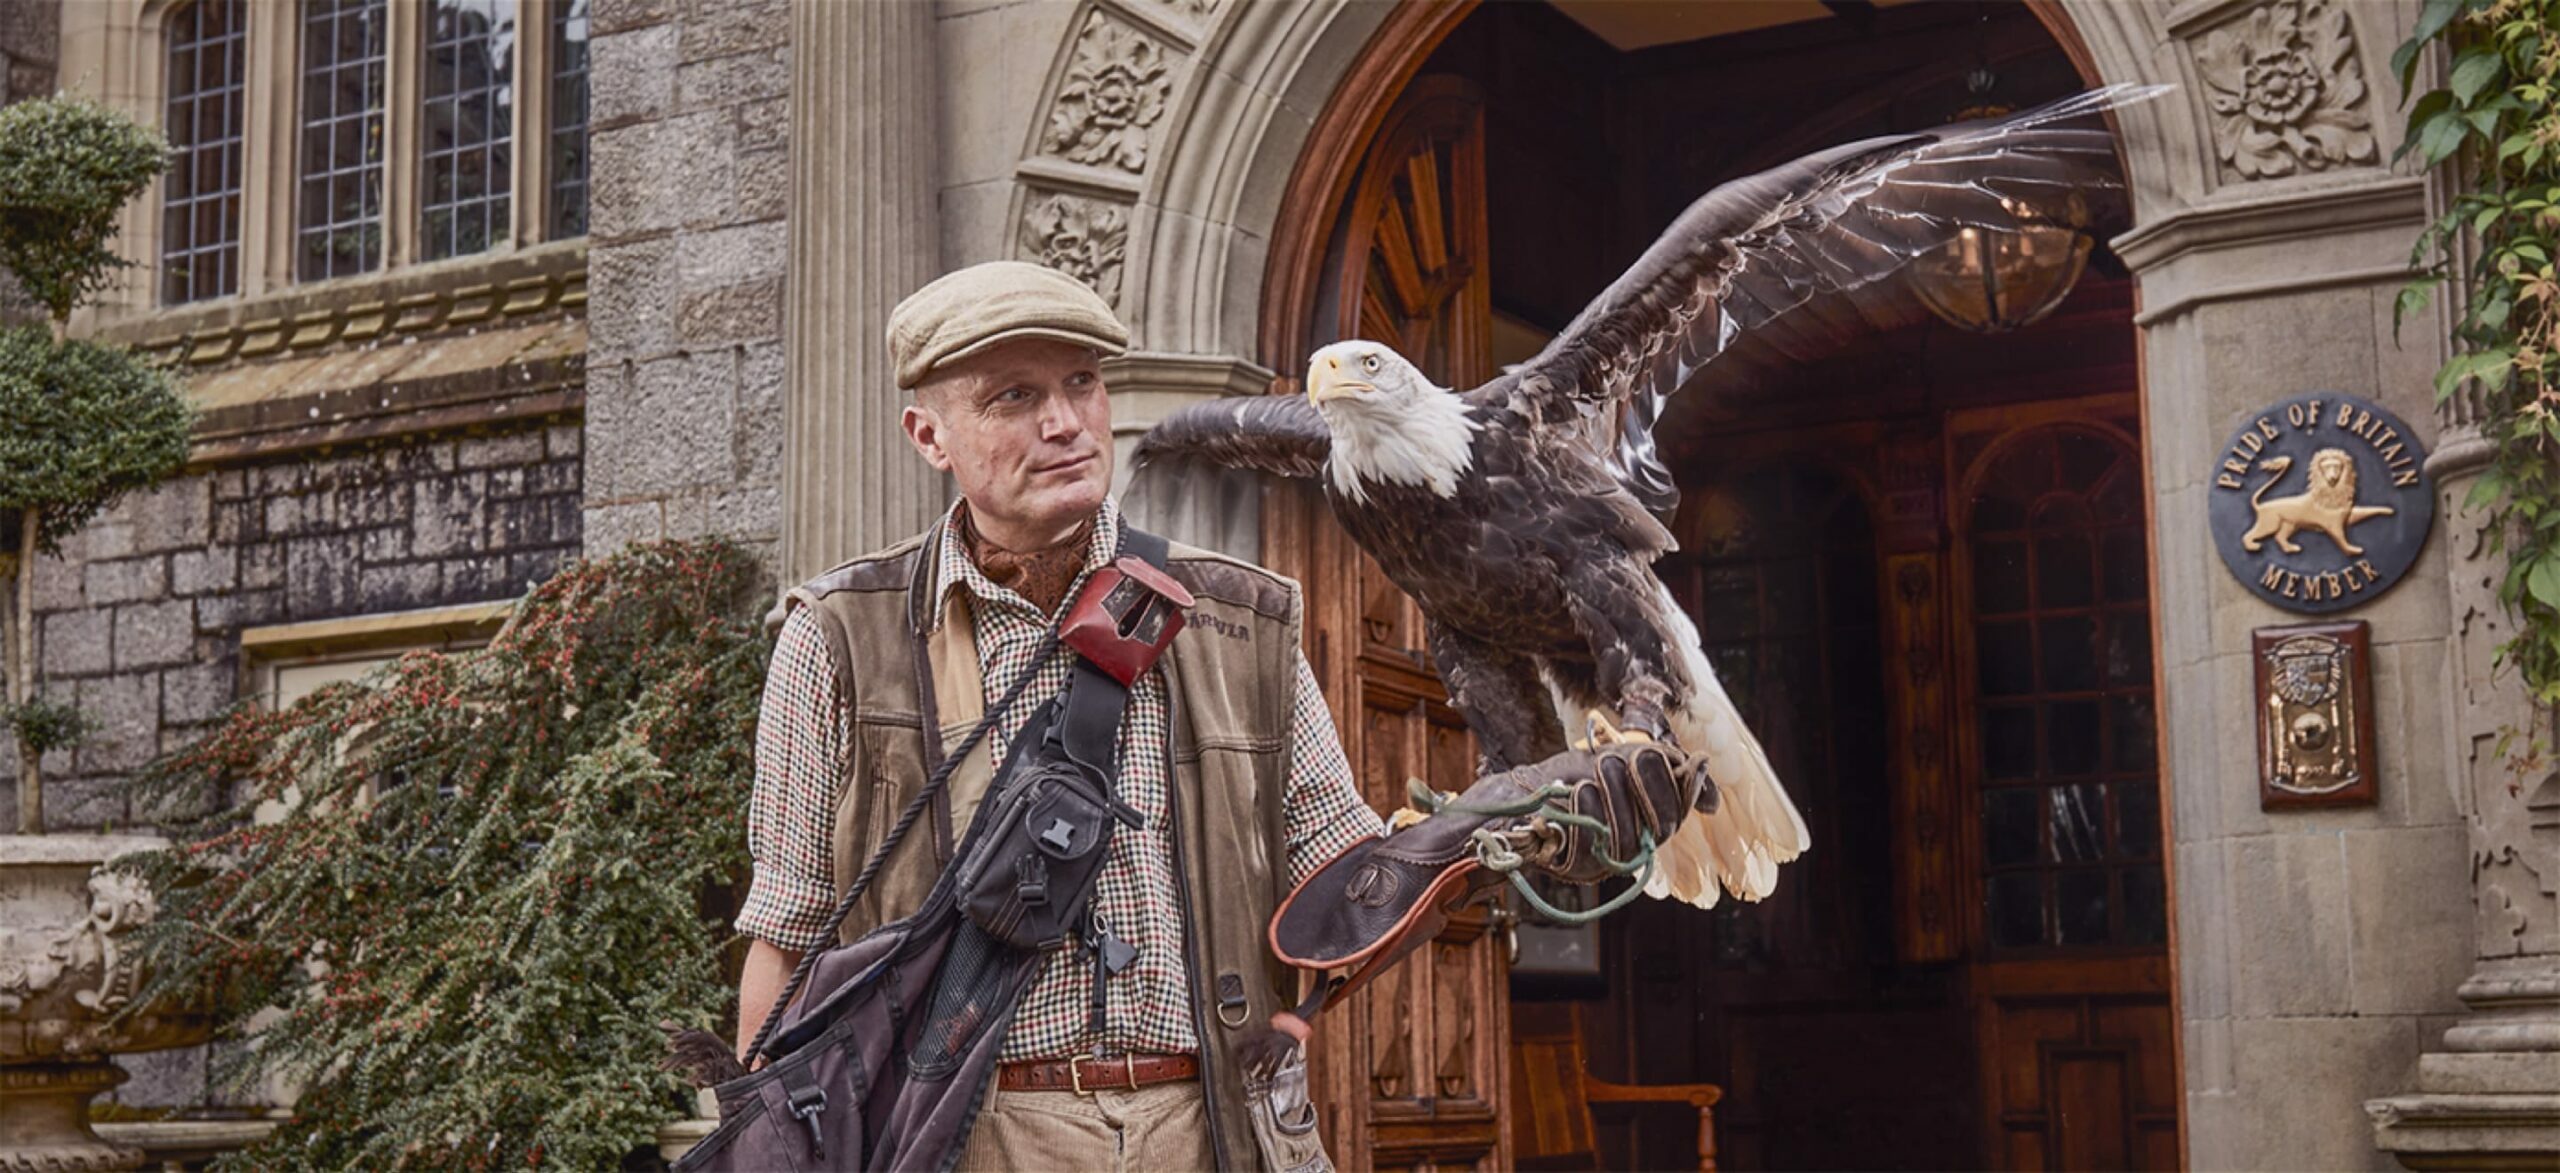 news-top-flight-falconry-experience-in-england-bovey-castle-02-5132193